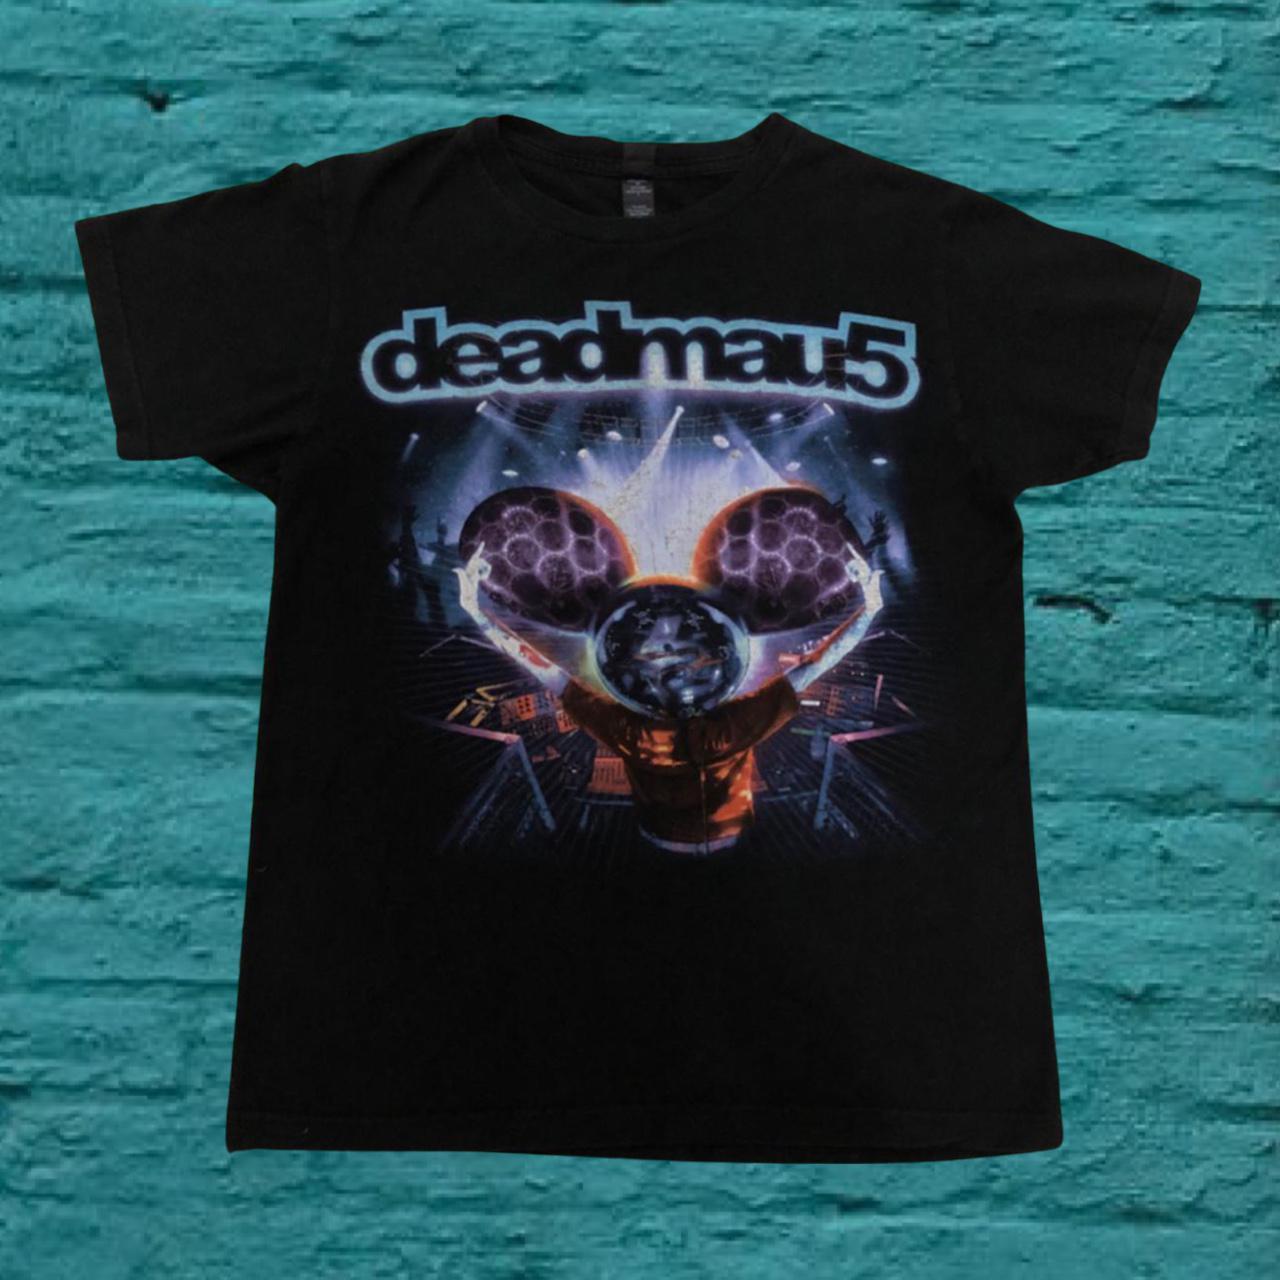 Product Image 1 - deadmau5 T-shirt 

•Size Small

•Measurements: laying